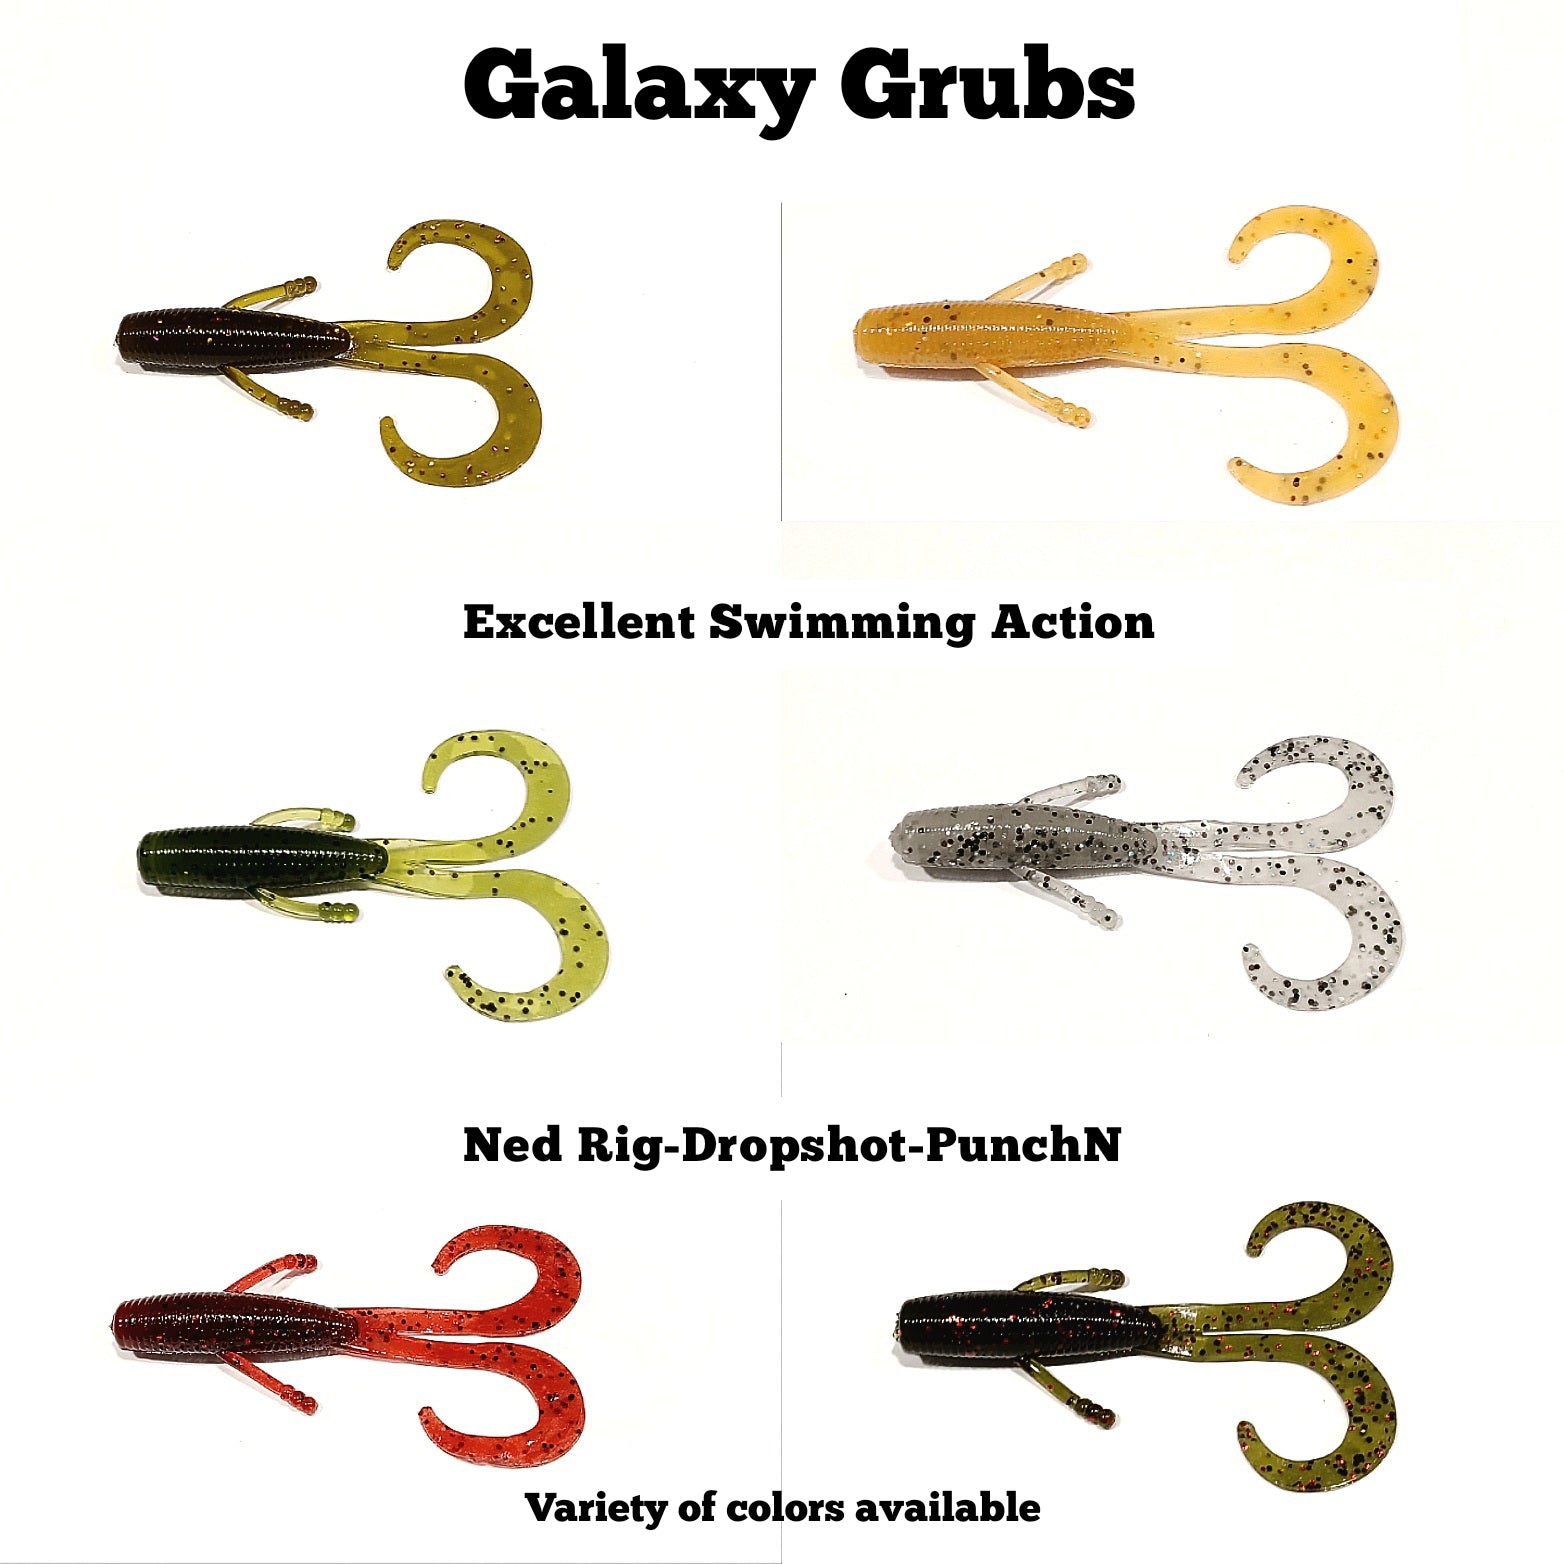 Galaxy Grub (twin tail) variety of colors available